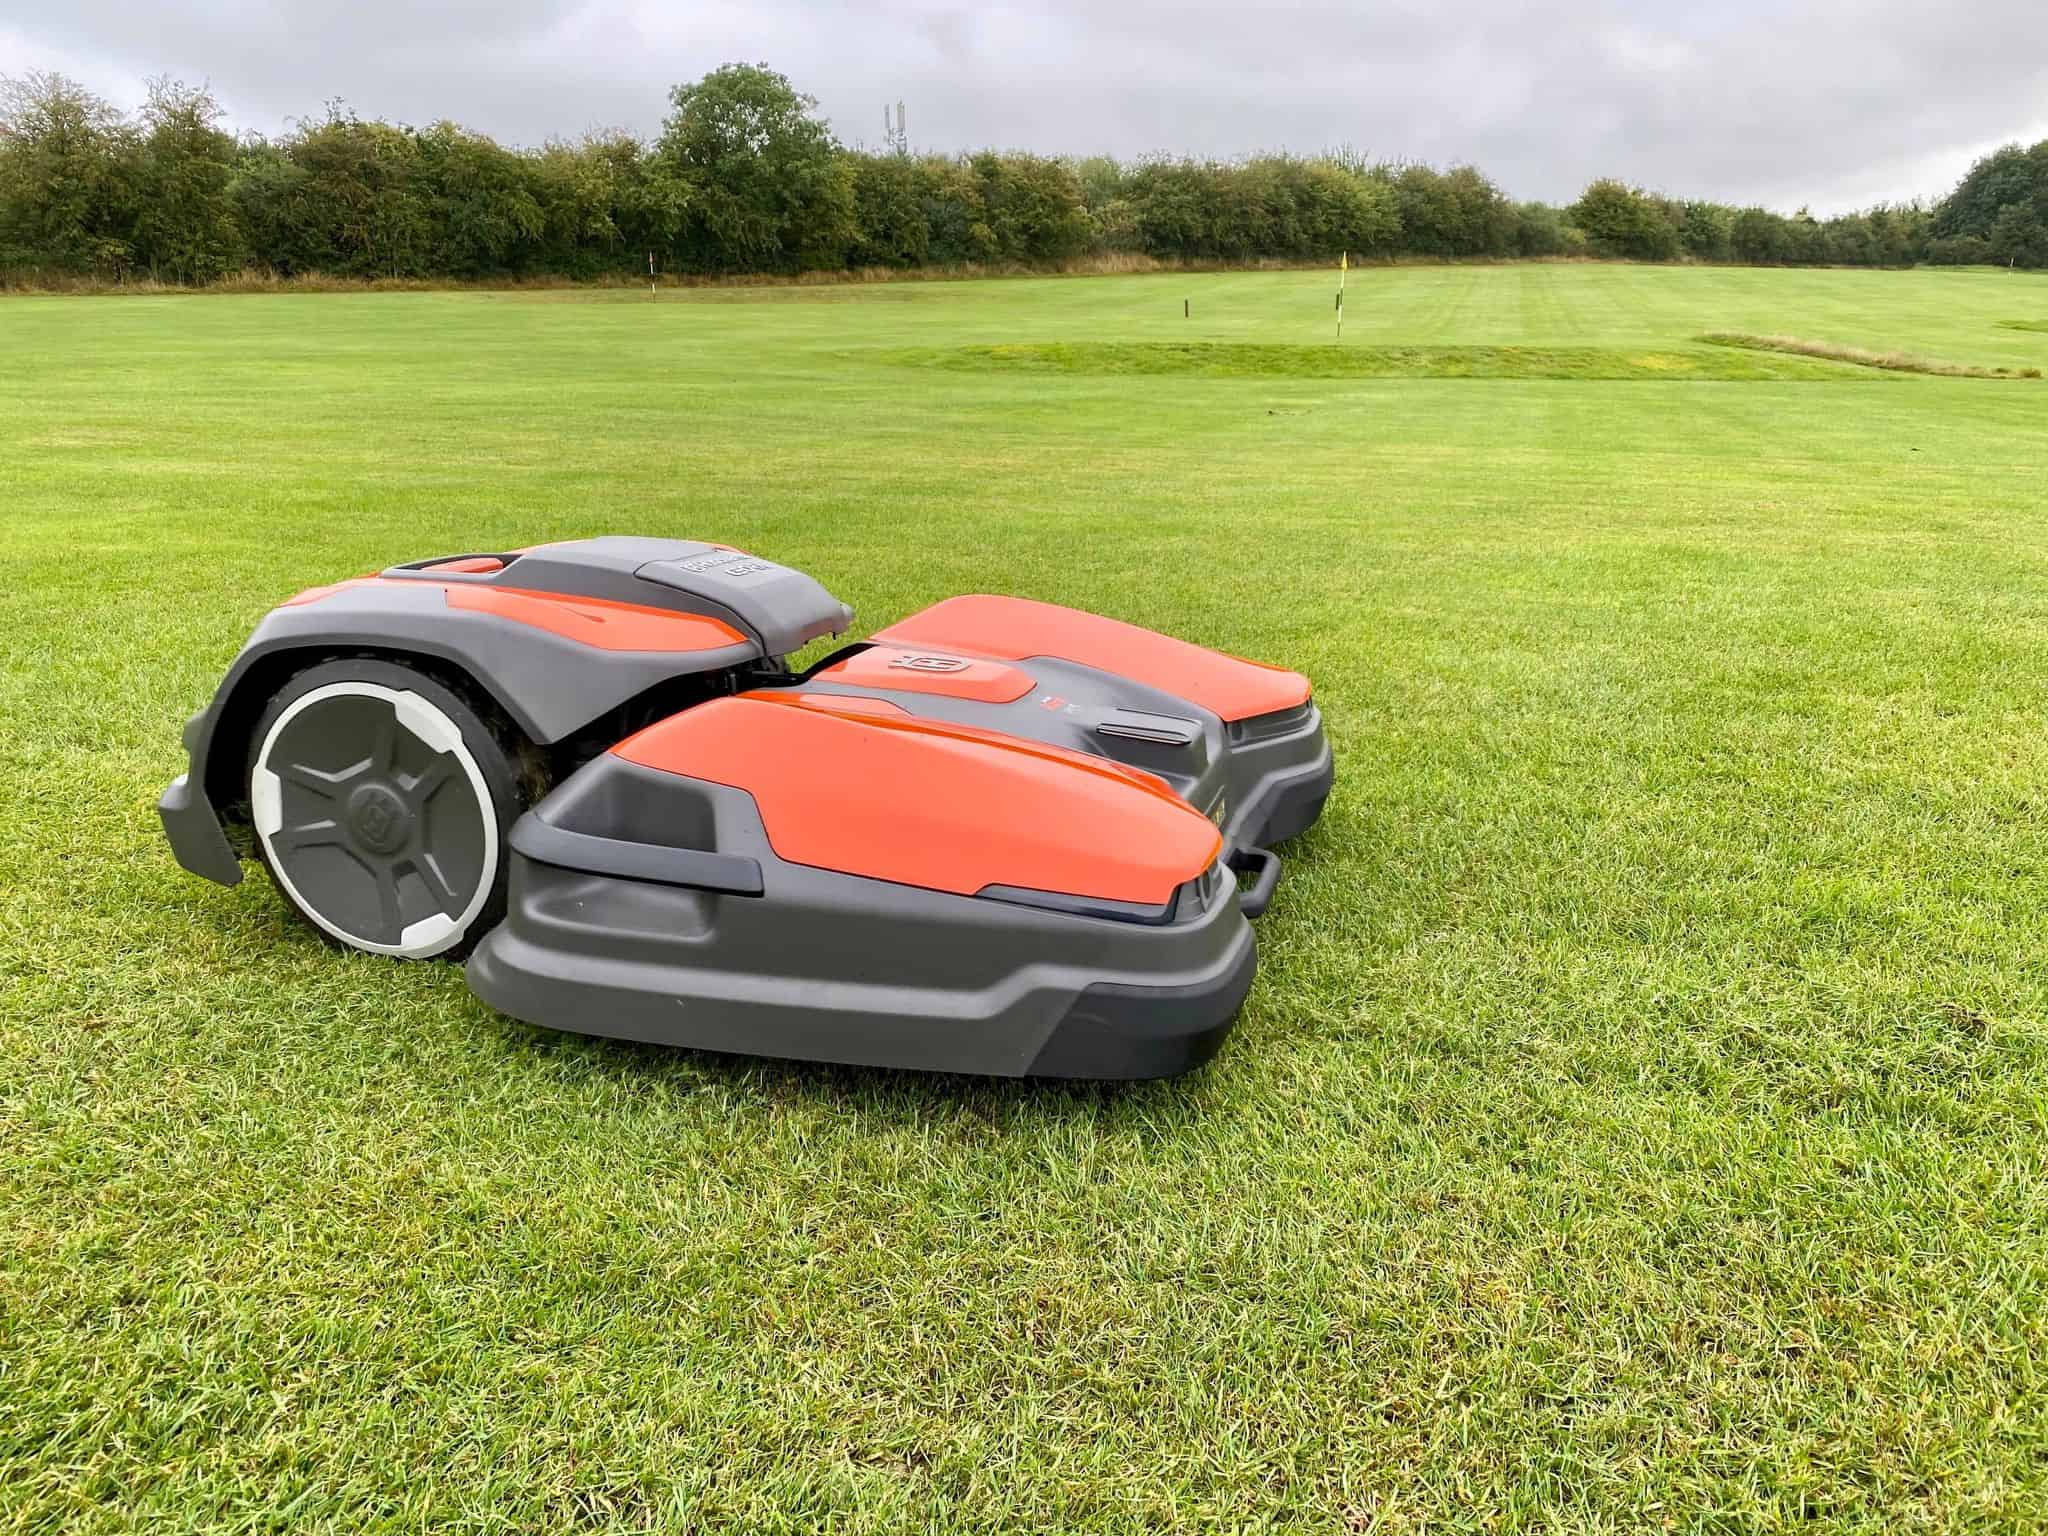 Golf Business News - Husqvarna rolls out robotic deck mower with